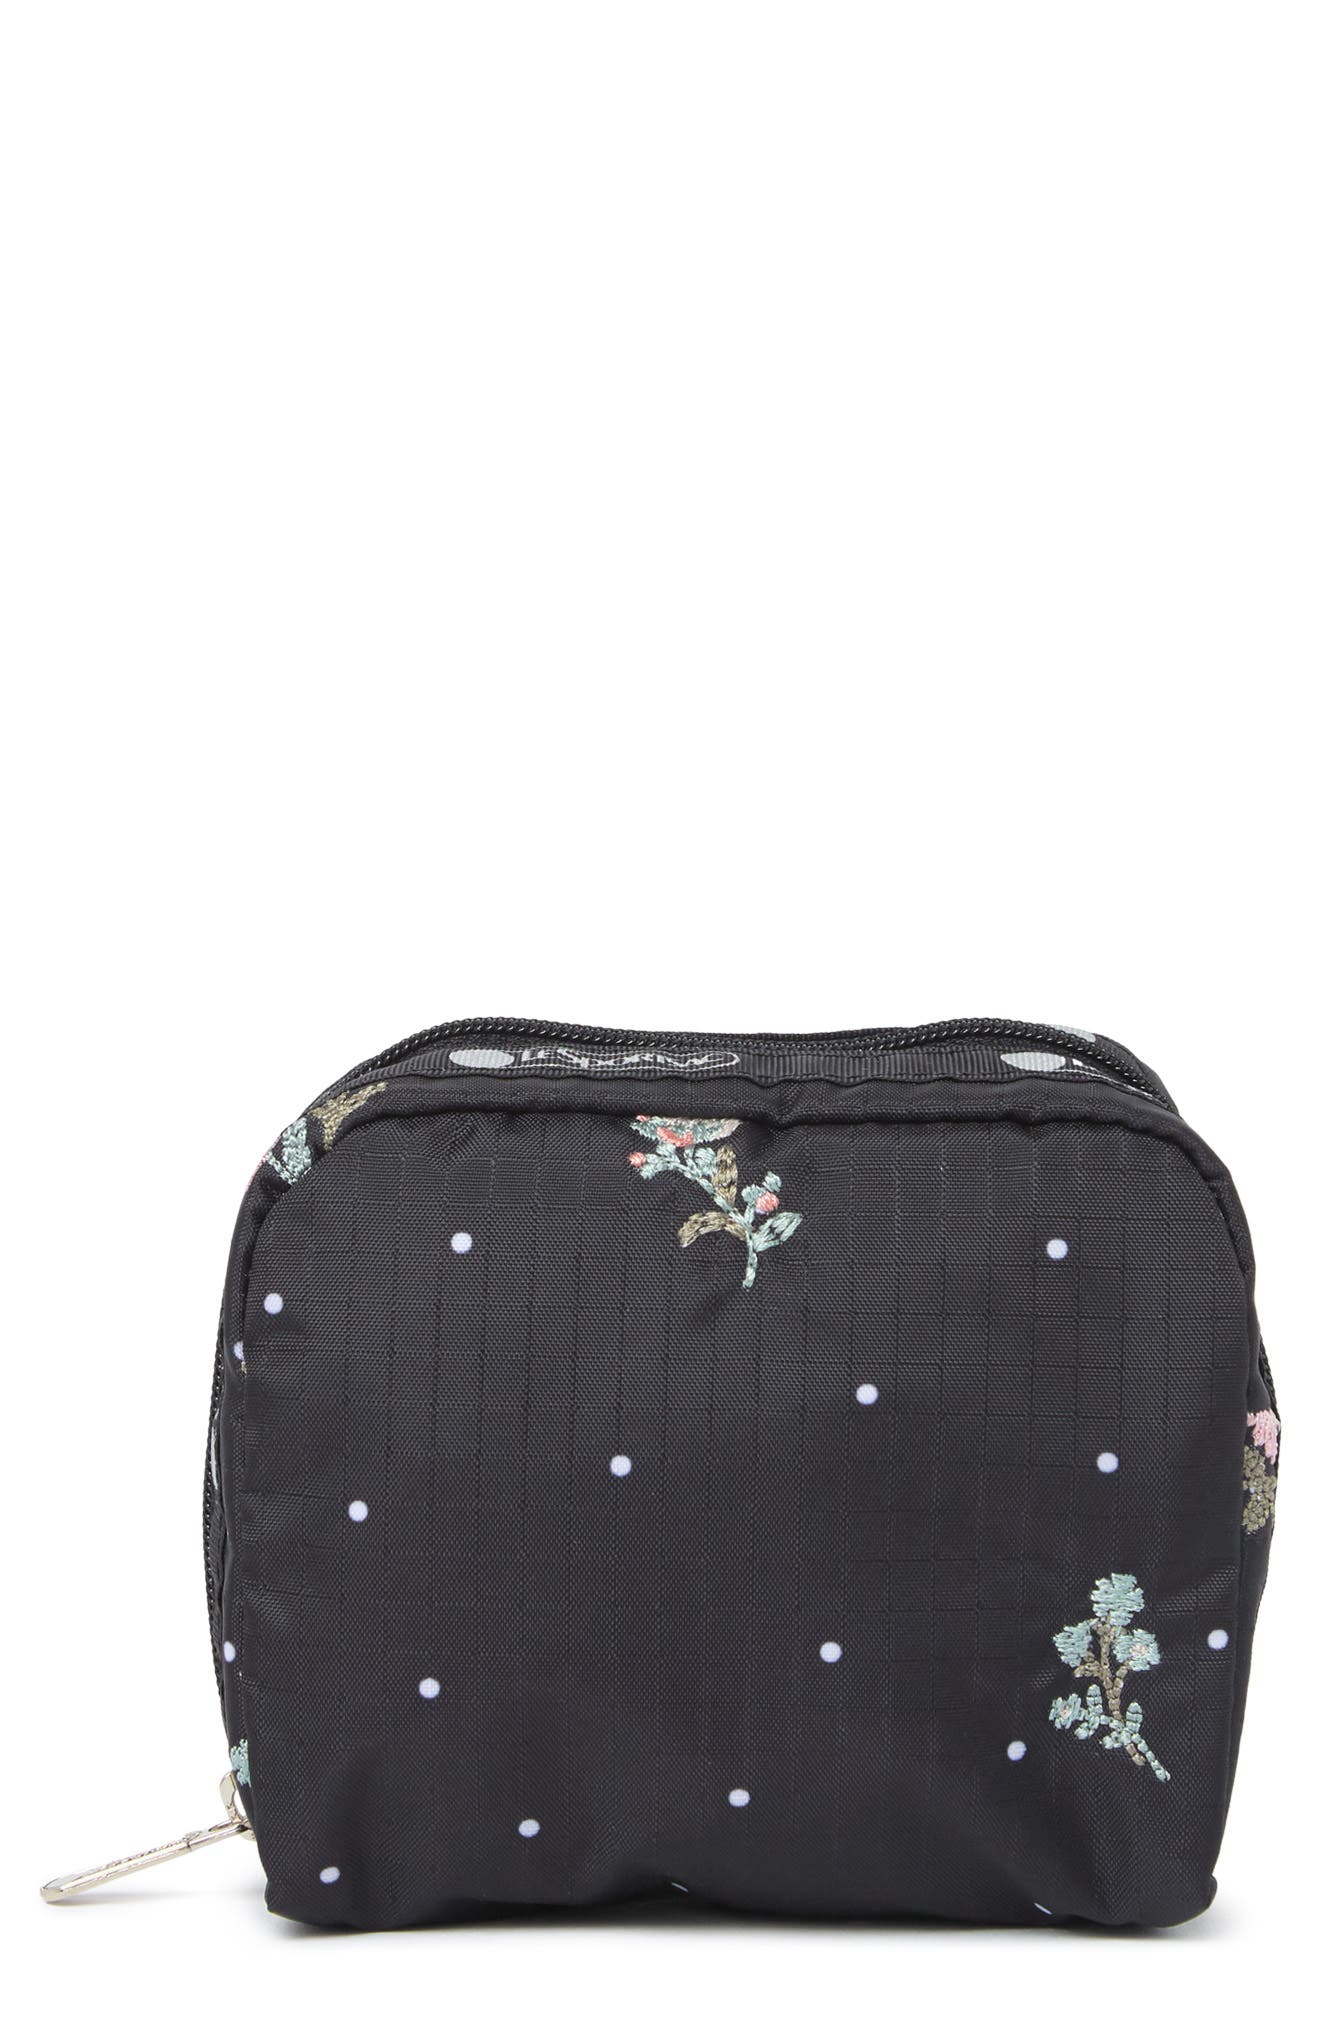 Lesportsac Patterned Square Cosmetic Bag In Flower Dreamcatcher